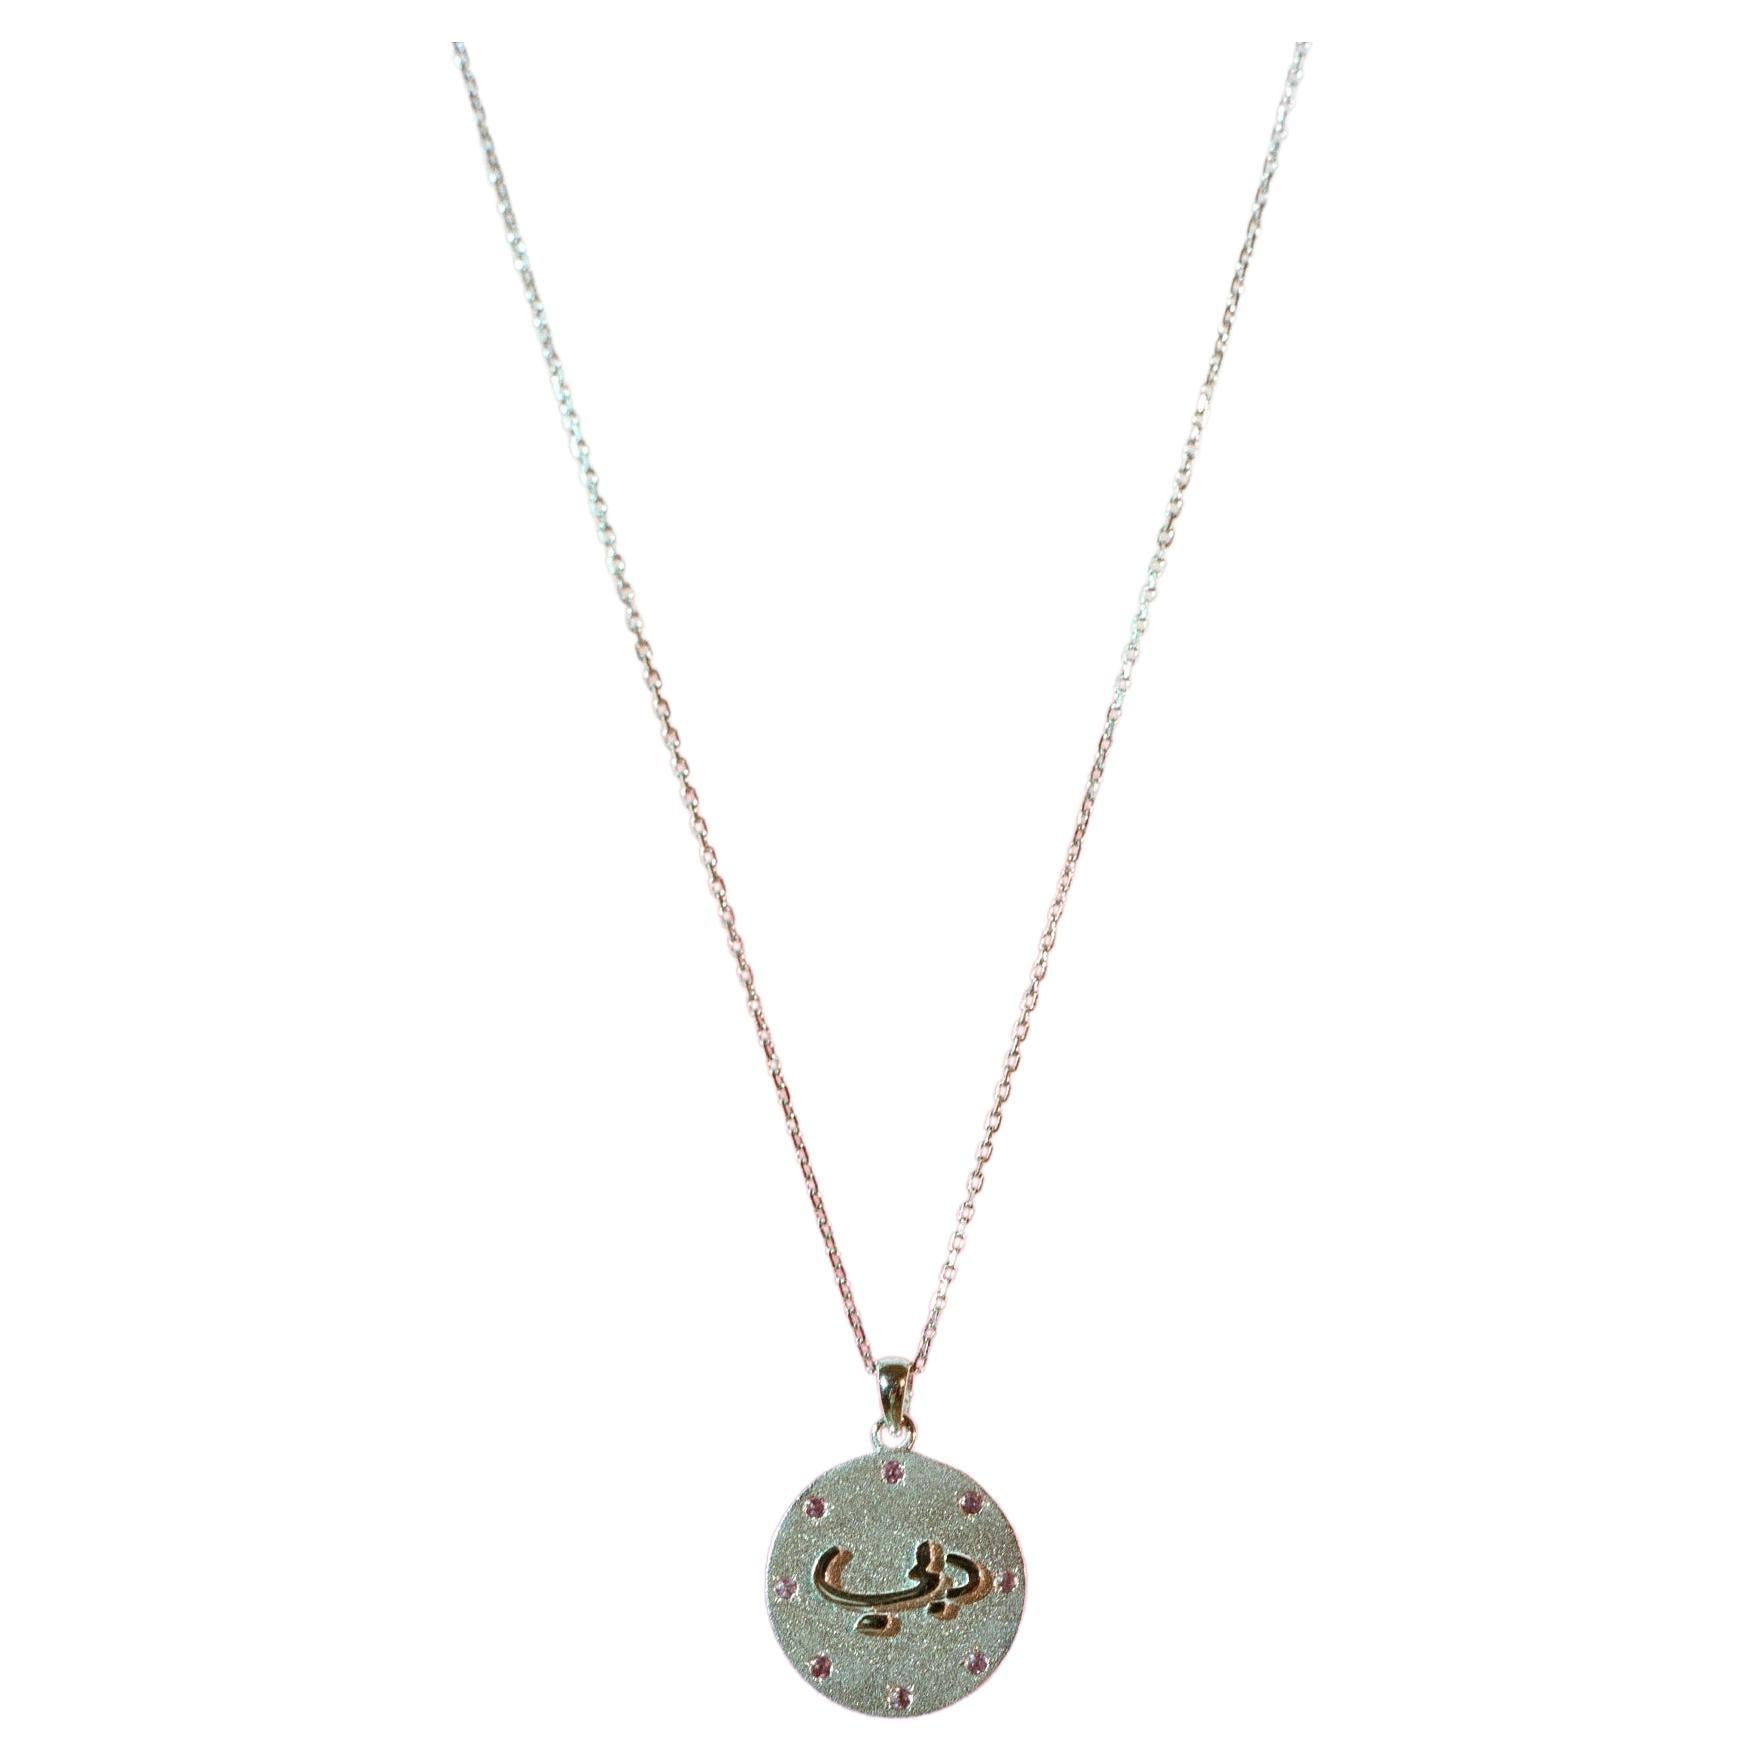  Round shaped white Gold adjustable chain Necklace. For Sale